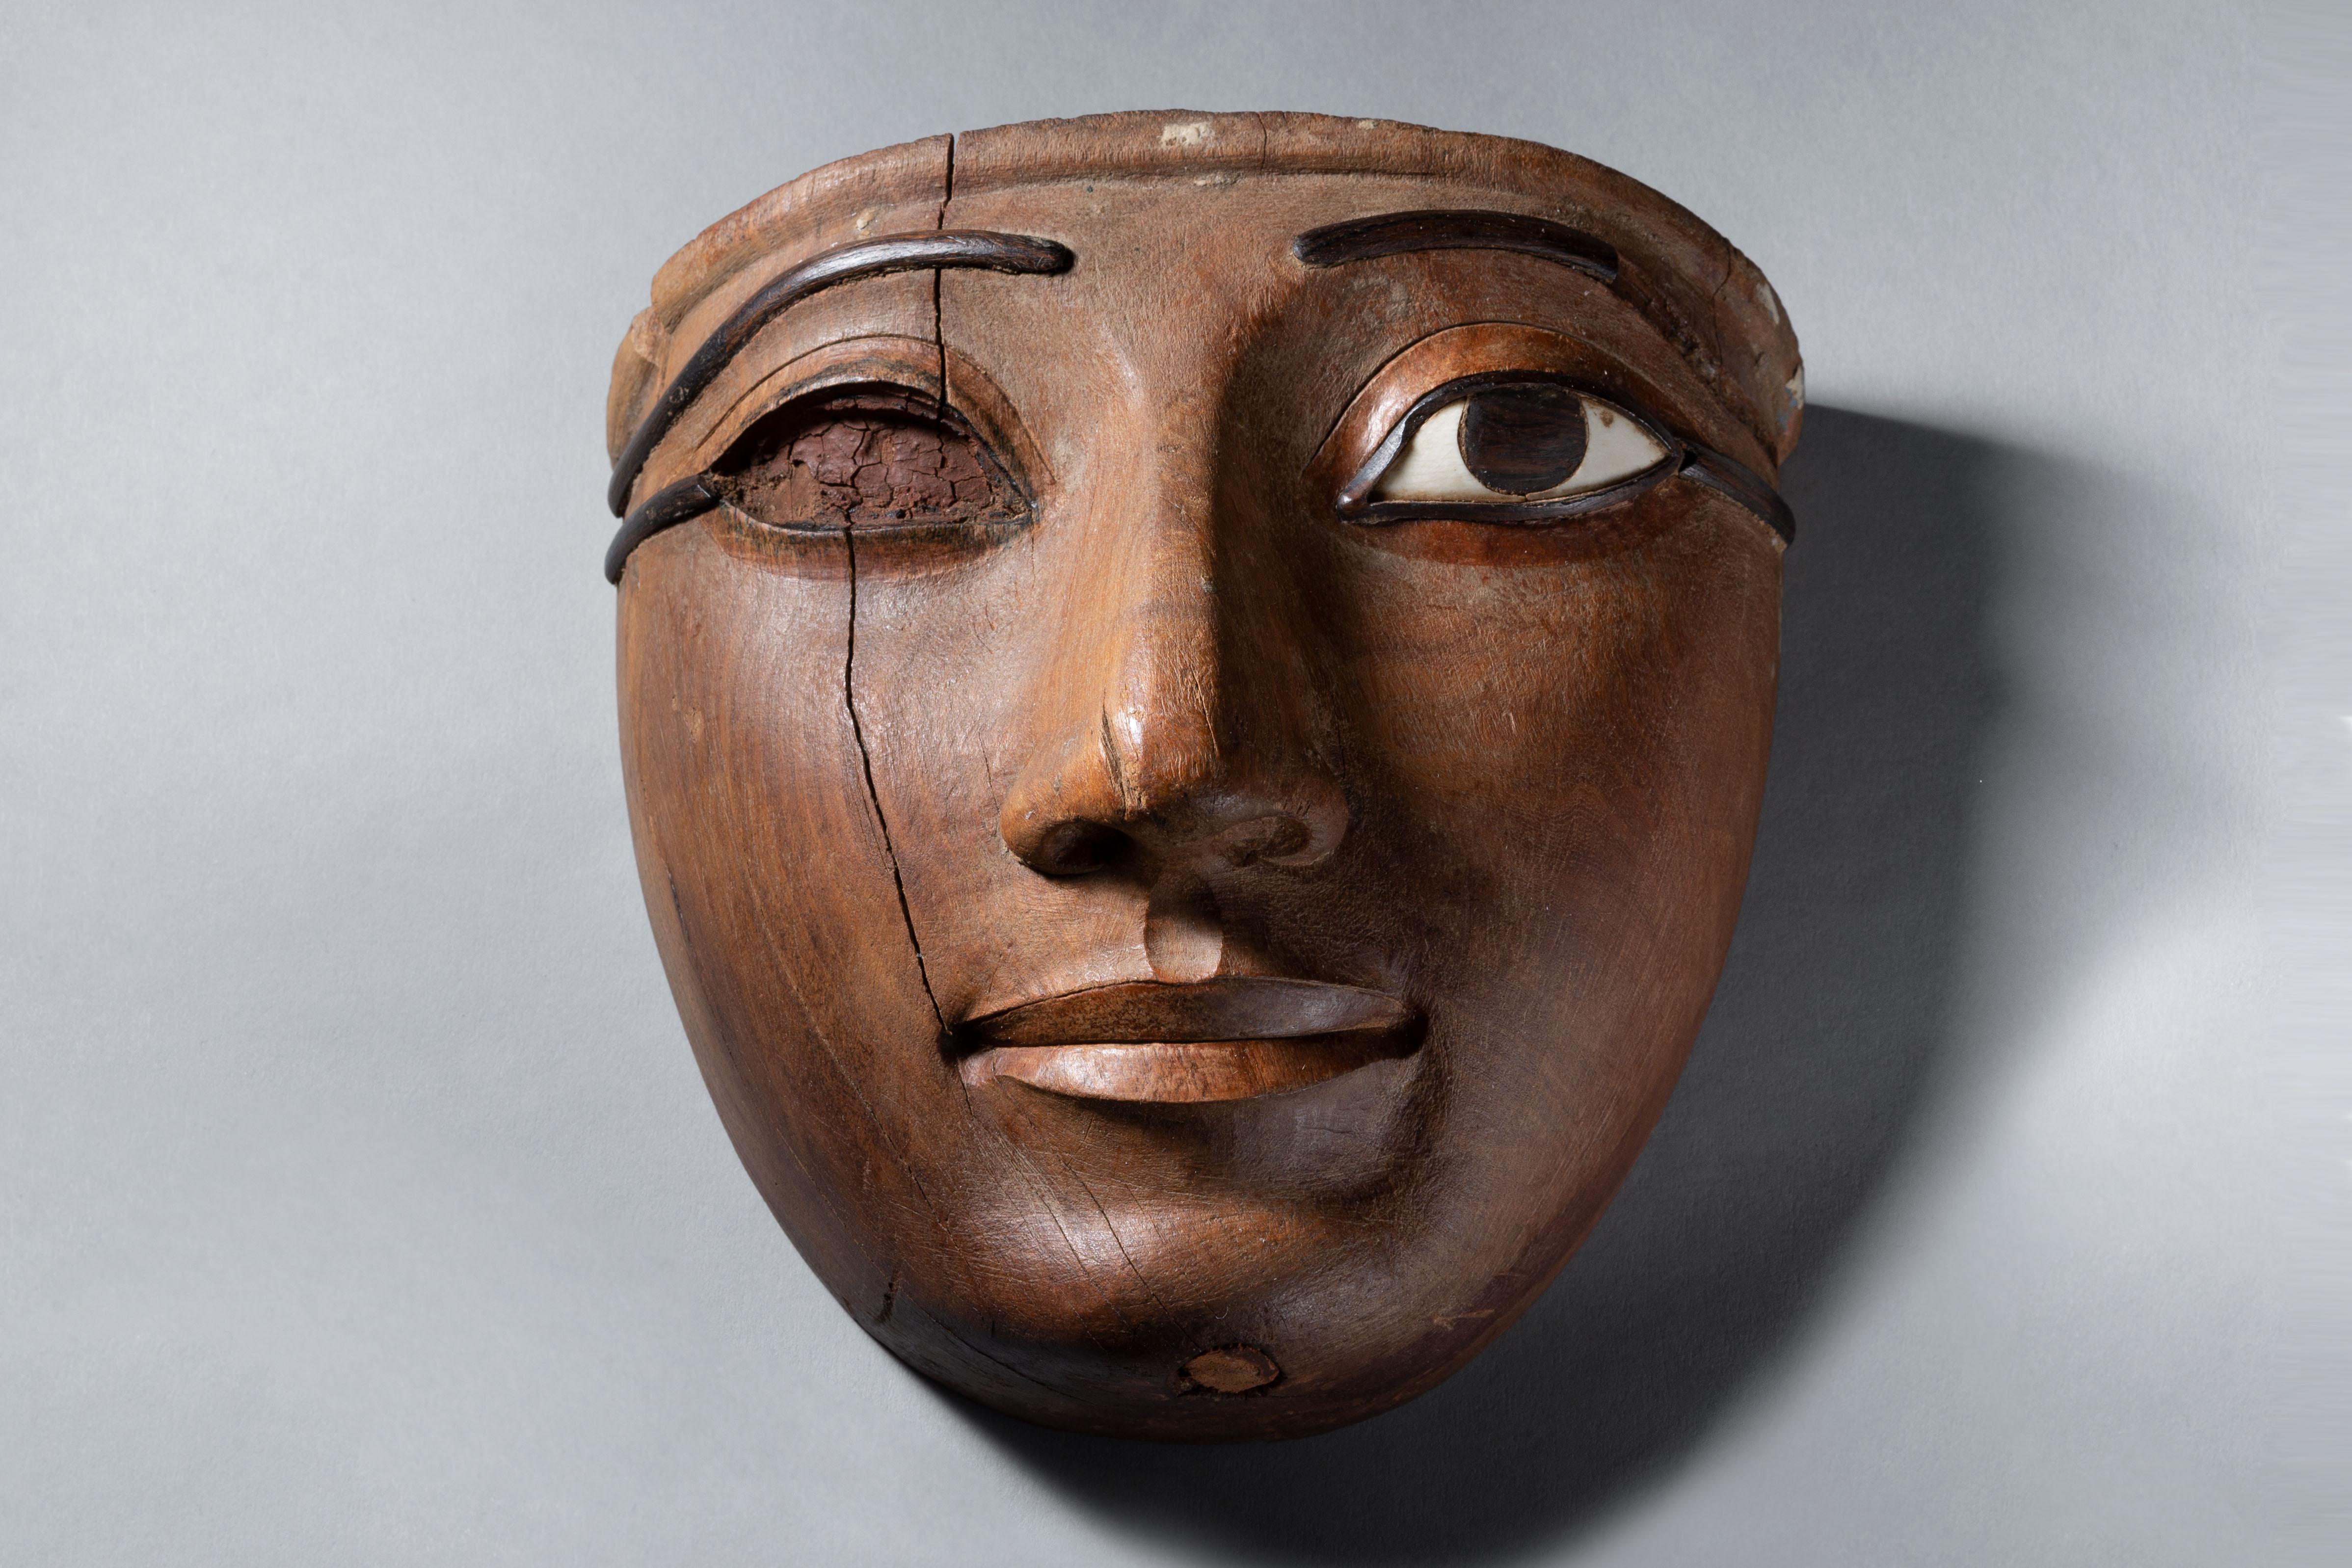 Exceptionally Fine Wooden Sarcophagus Mask
Third Intermediate Period,  21st Dynasty, circa 1069-945 BC.
Acacia wood, rosewood, hippopotamus ivory

Masterfully carved from a single piece of fine-grained hardwood, the present mask is characteristic of